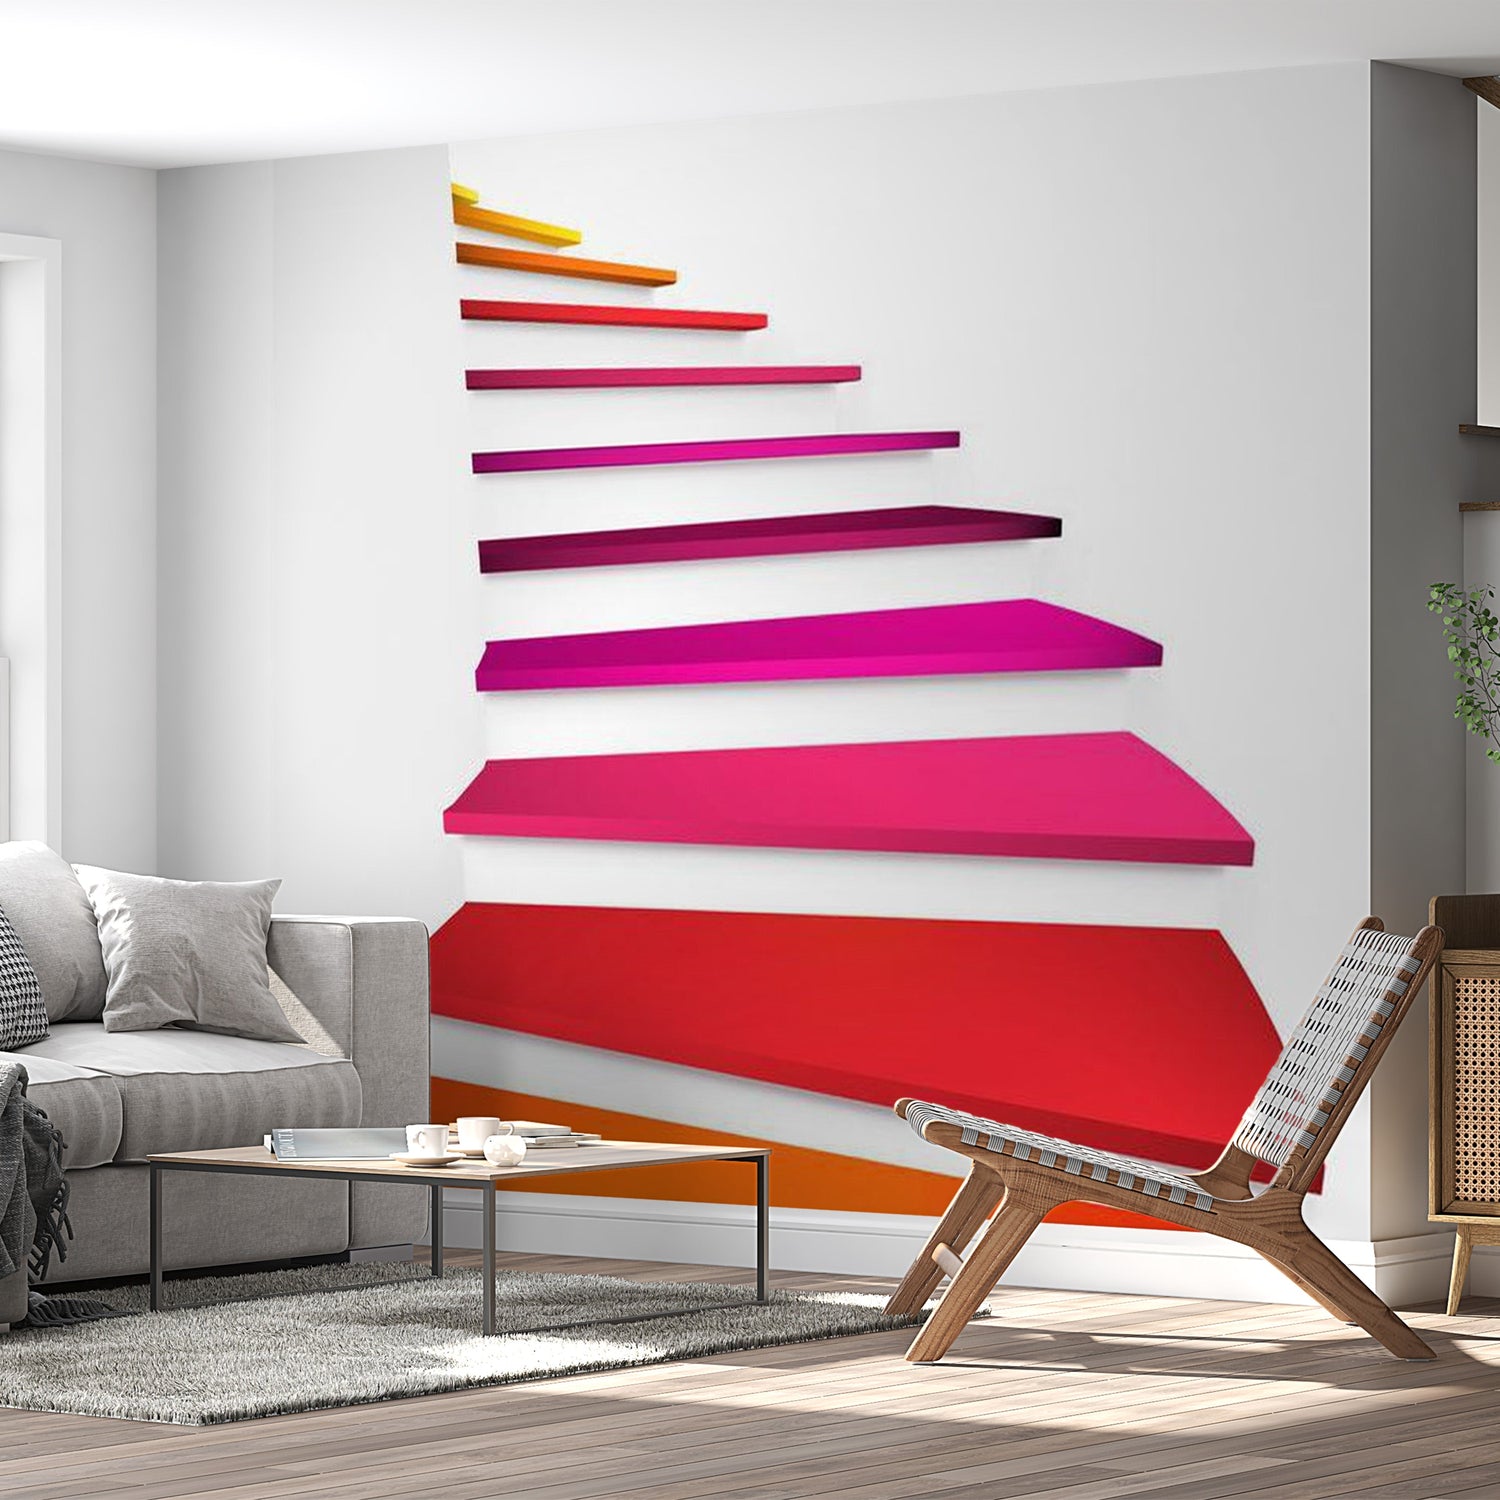 3D Illusion Wallpaper Wall Mural - Colorful Stairs